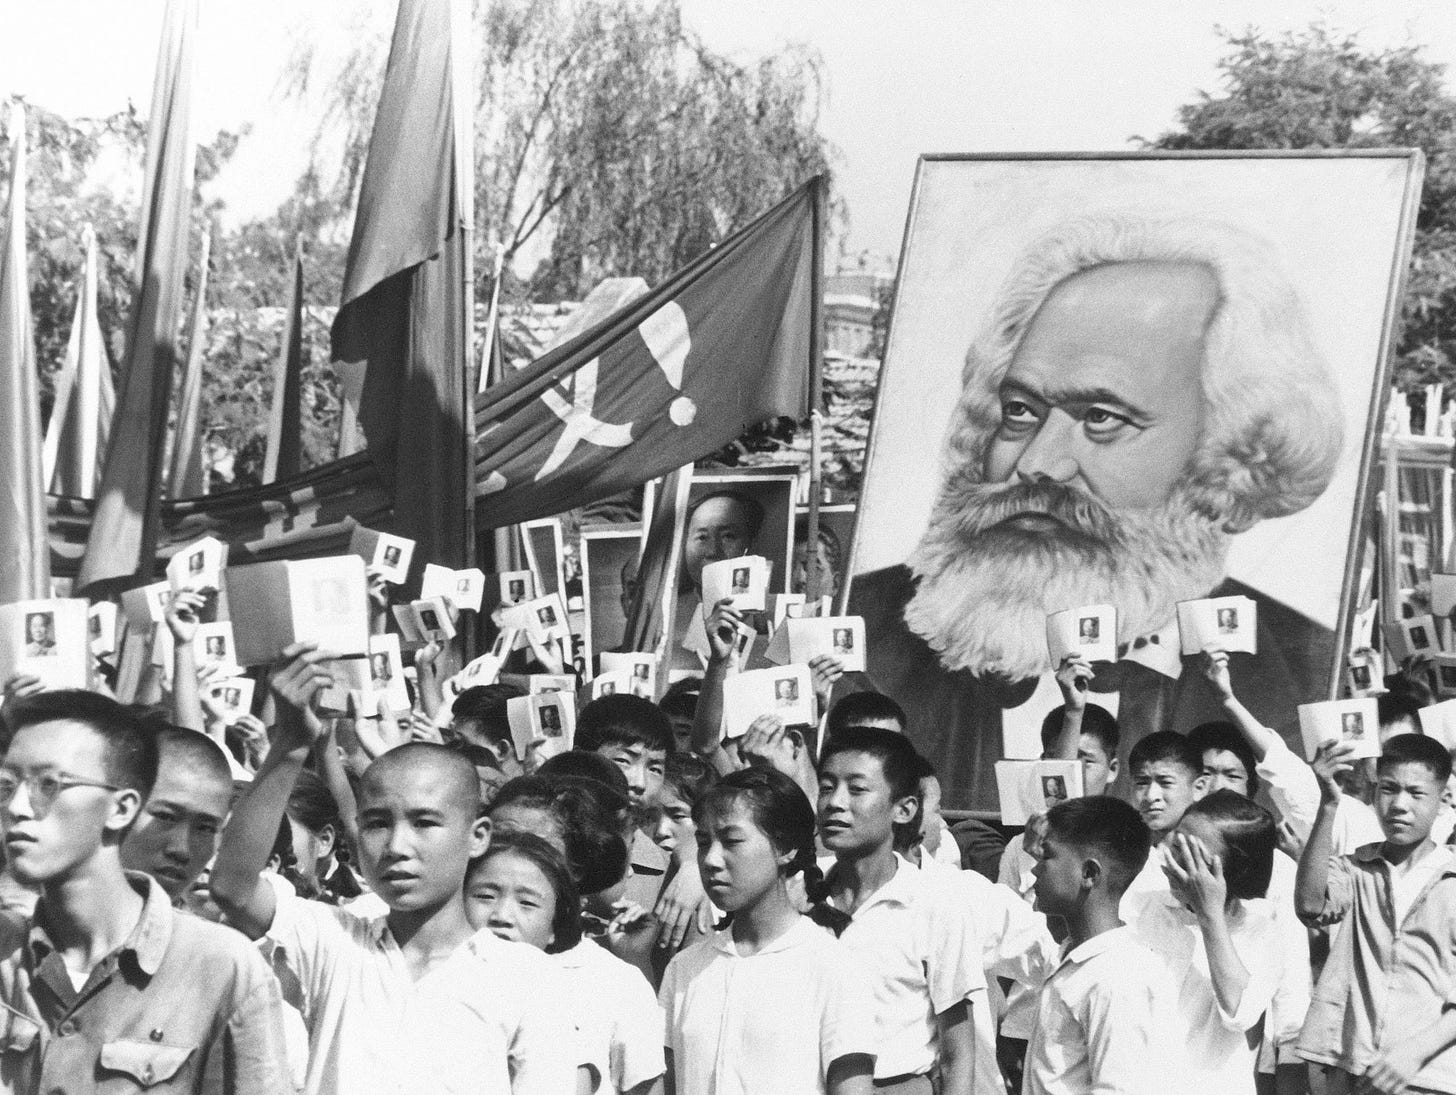 In this Sept. 14, 1966 file photo, youths are seen at a rally during the height of the Red Guard upheaval waving copies of the collected writings of Communist Party Chairman Mao Zedong, often referred to as Mao's Little Red Book and carrying a poster of Karl Marx.